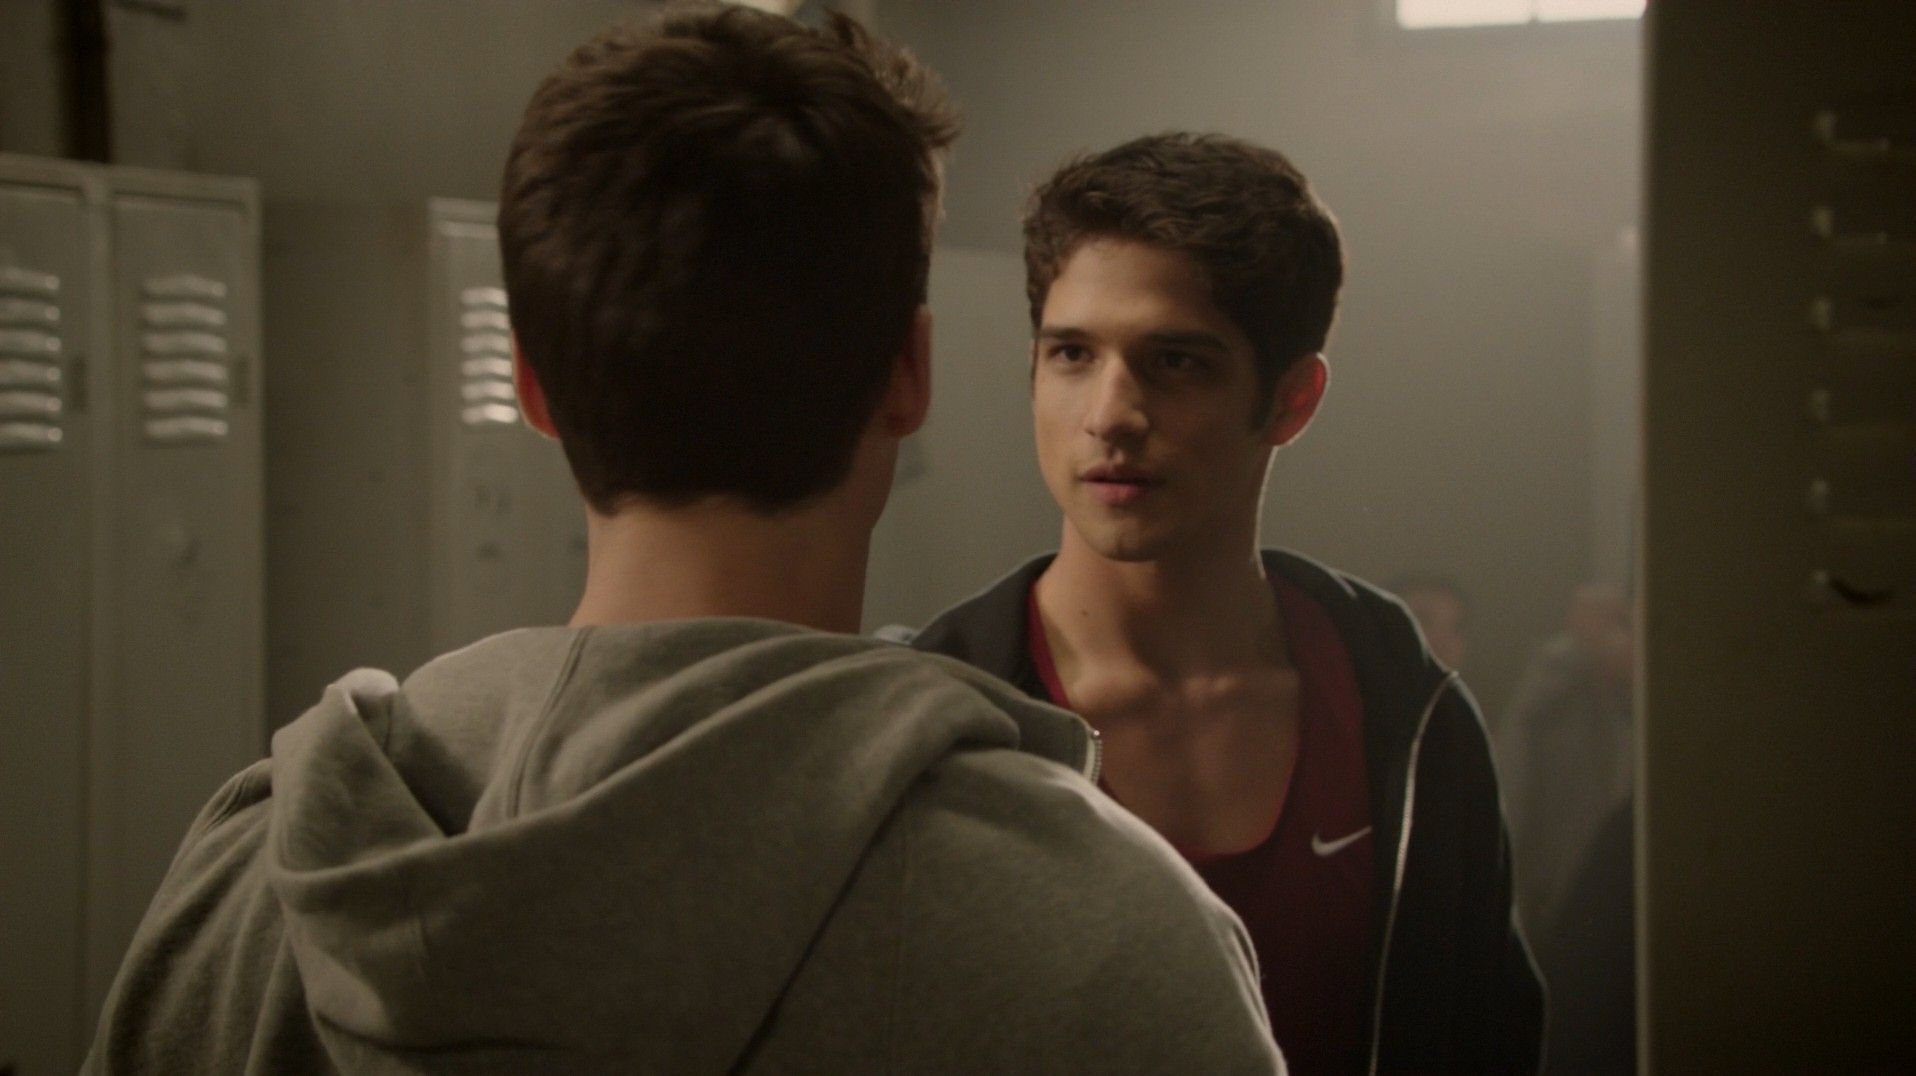 Photo of 3x04- Unleashed for fans of Scott & Stiles. scott & stiles, images, image, wallp...